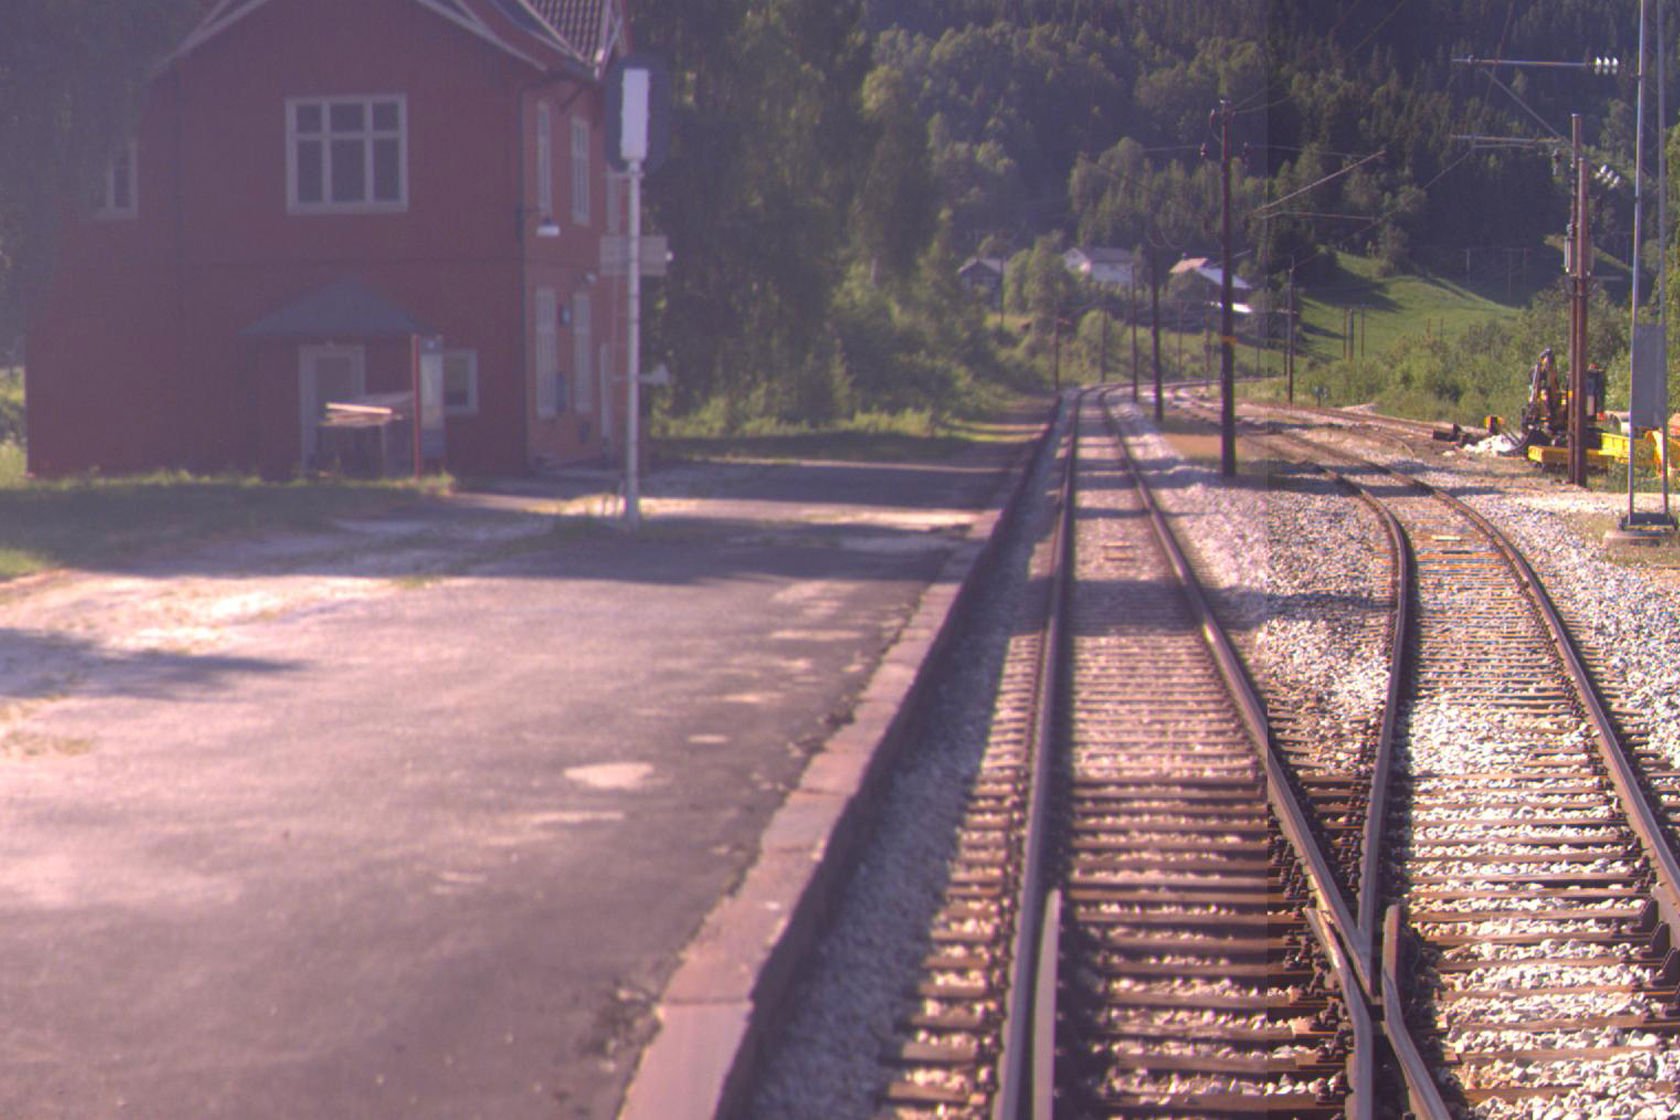 Tracks and station building at Losna station